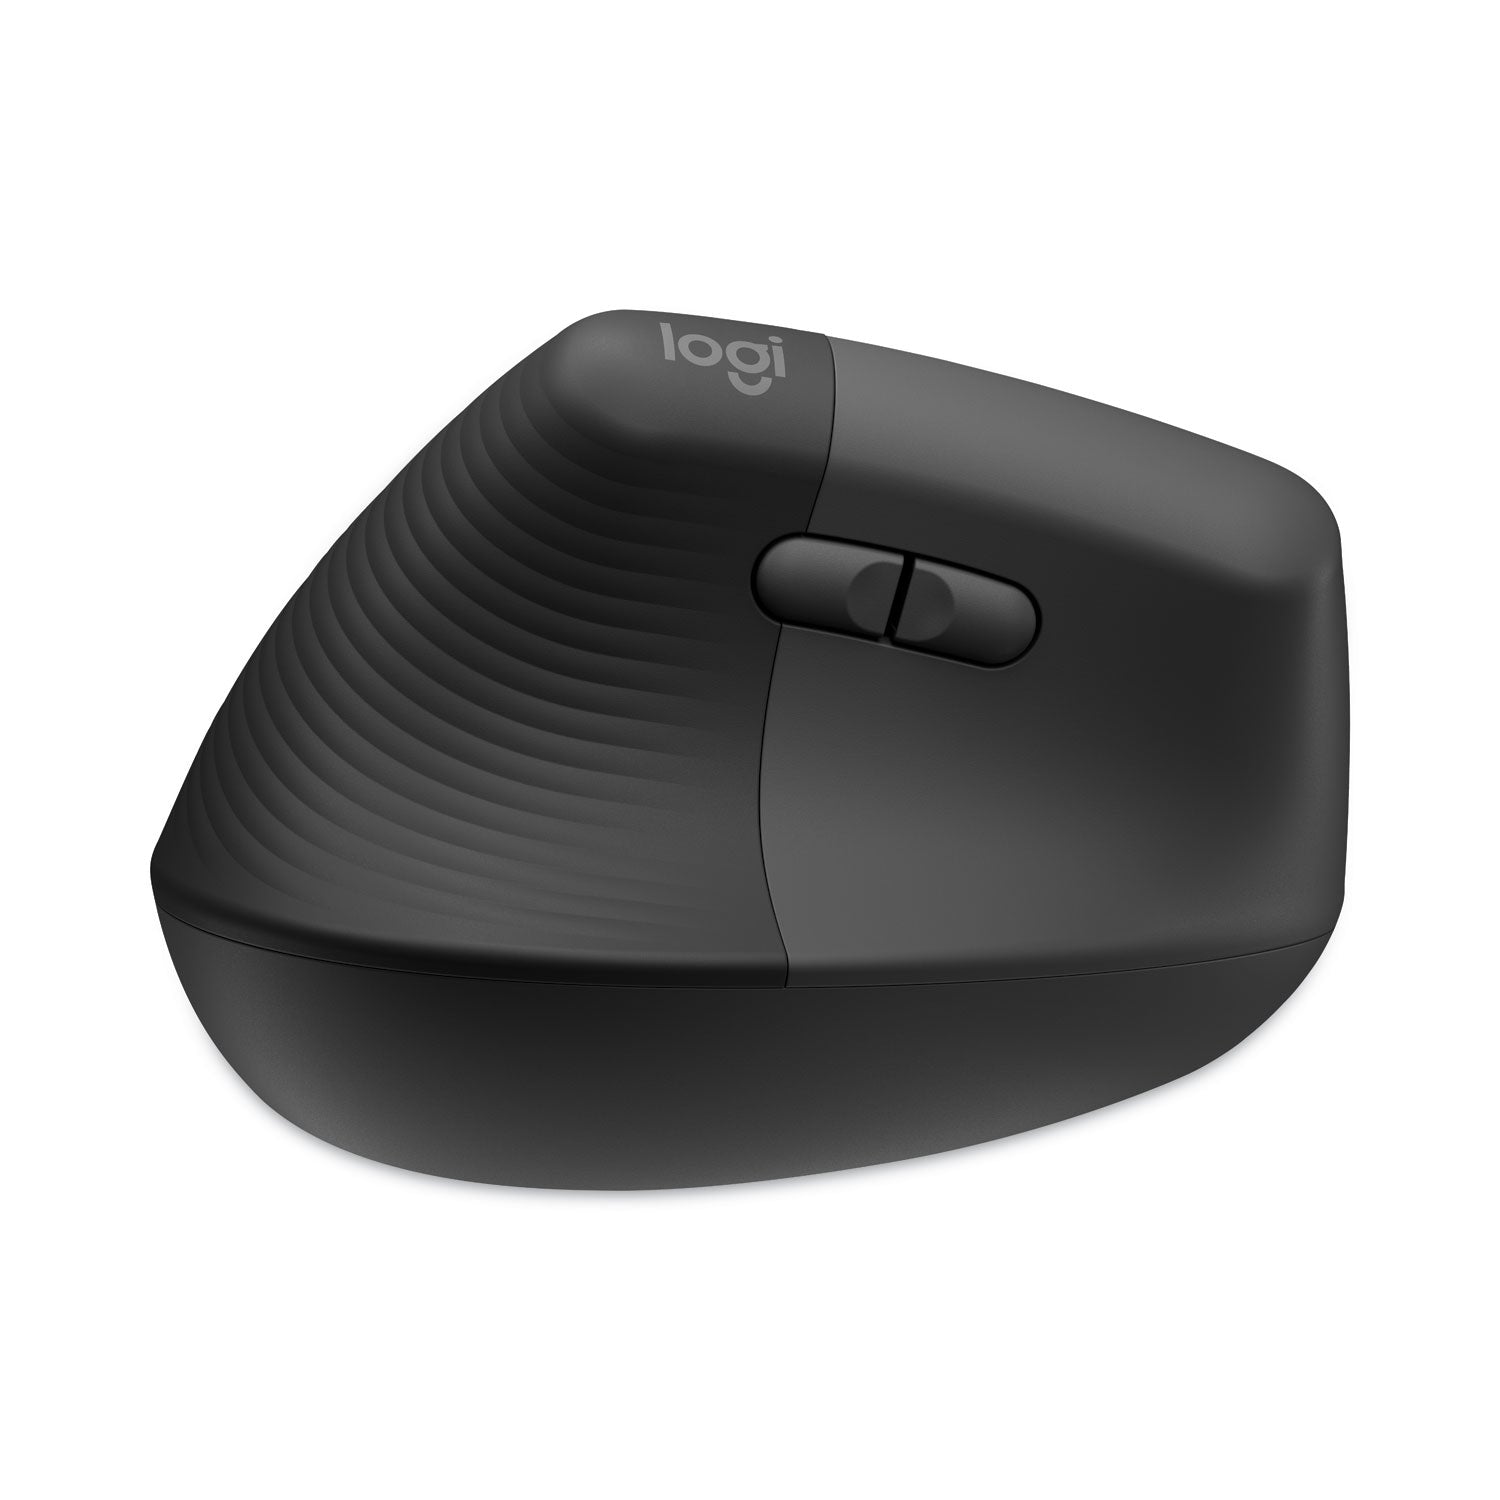 lift-vertical-ergonomic-mouse-24-ghz-frequency-32-ft-wireless-range-left-hand-use-graphite_log910006467 - 5